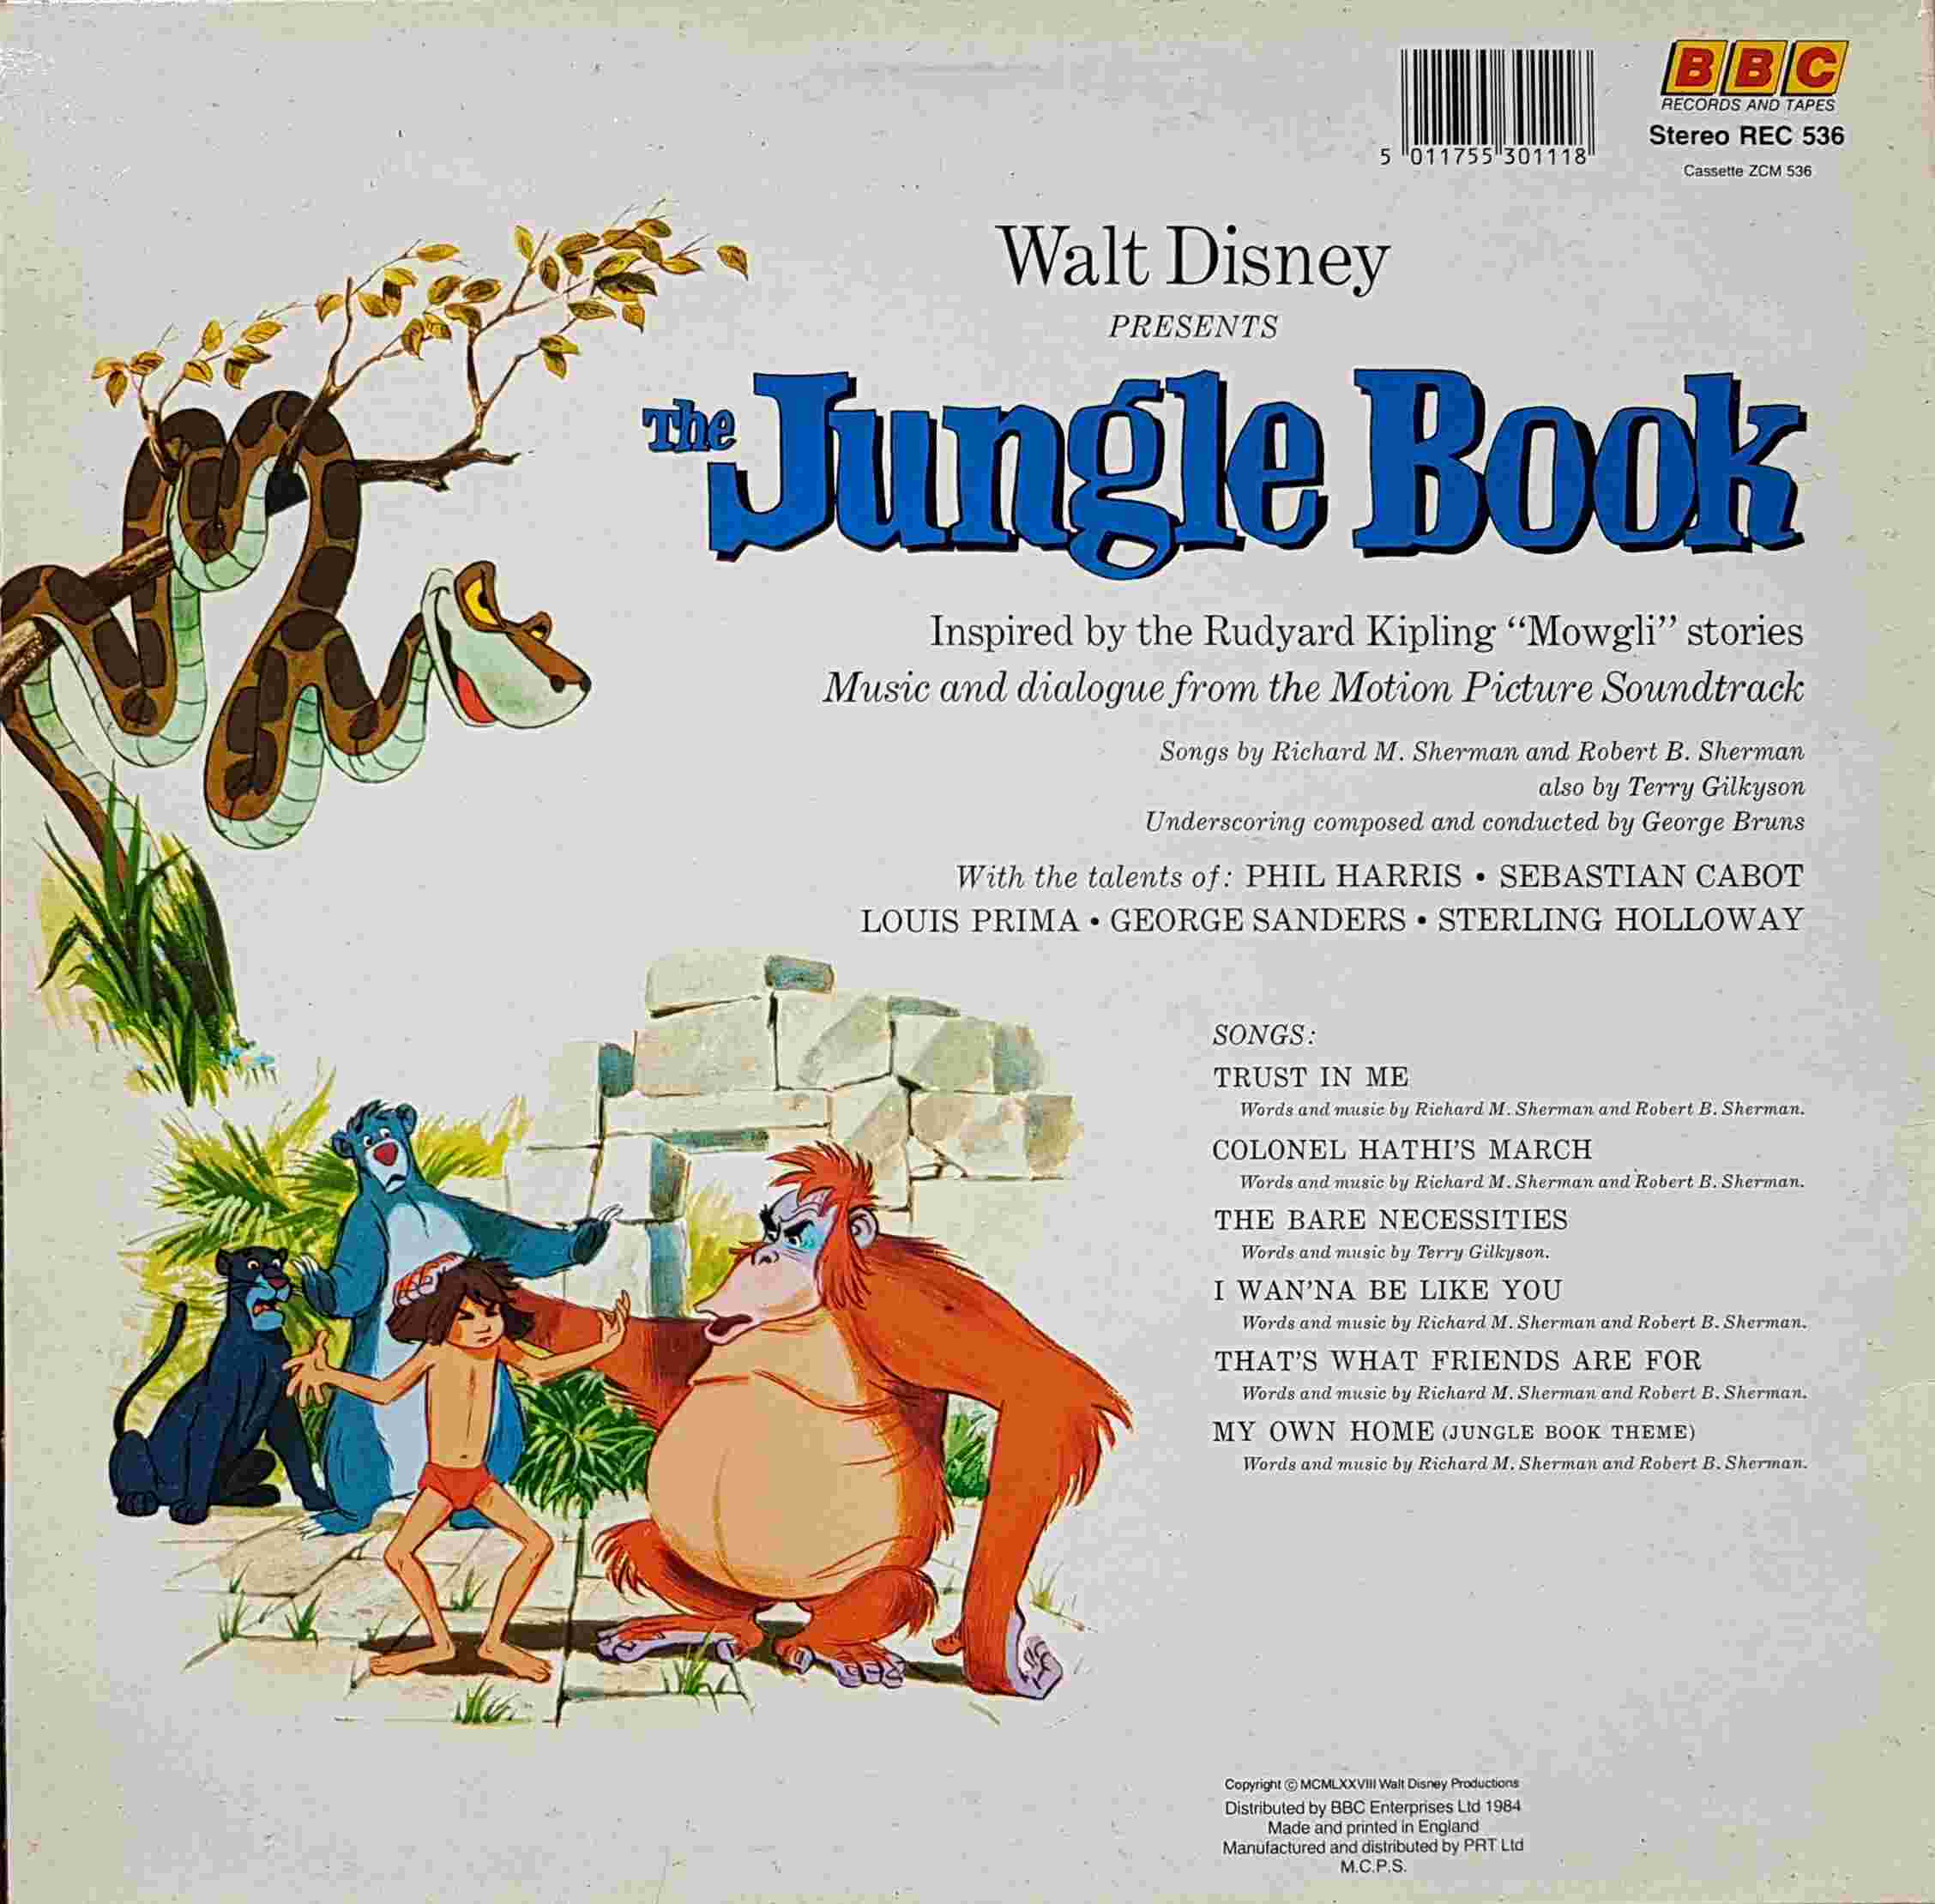 Picture of REC 536 The jungle book by artist Rudyard Kipling / Richard M. Sherman / Robert B. Sherman / Terry Gilkyson from the BBC records and Tapes library